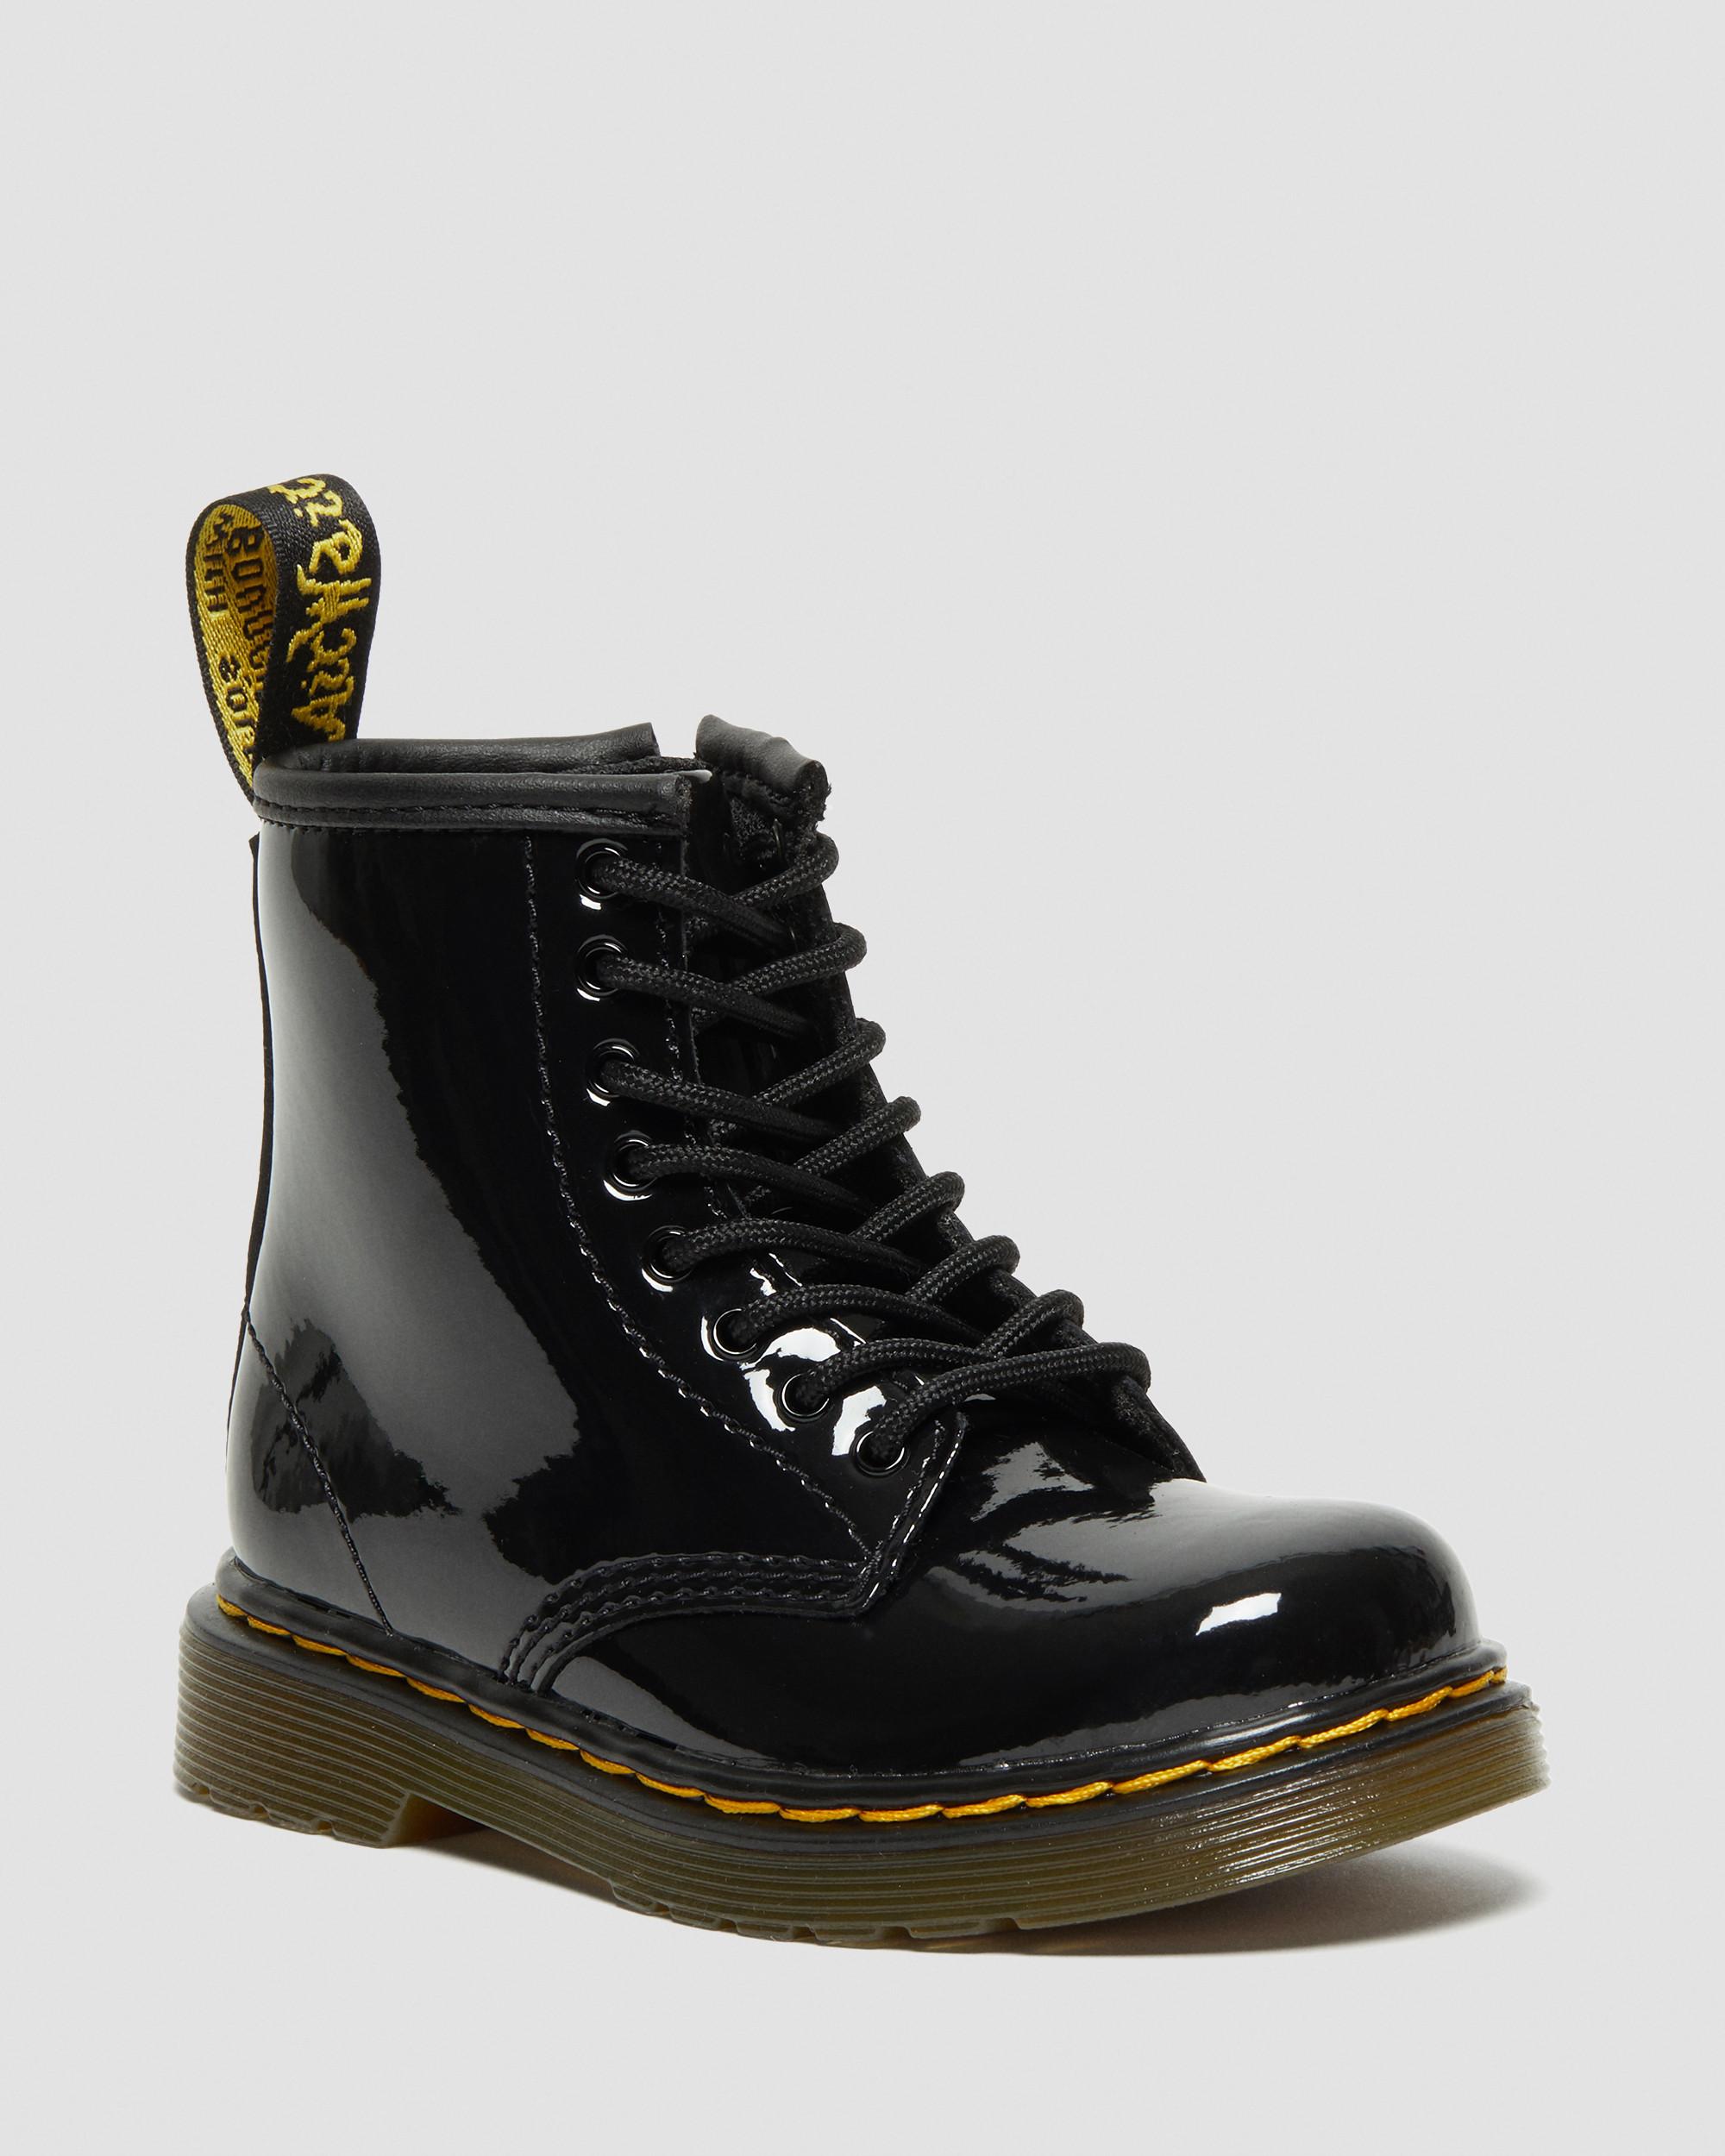 Toddler 1460 Patent Leather Lace Up Boots in Black | Dr. Martens